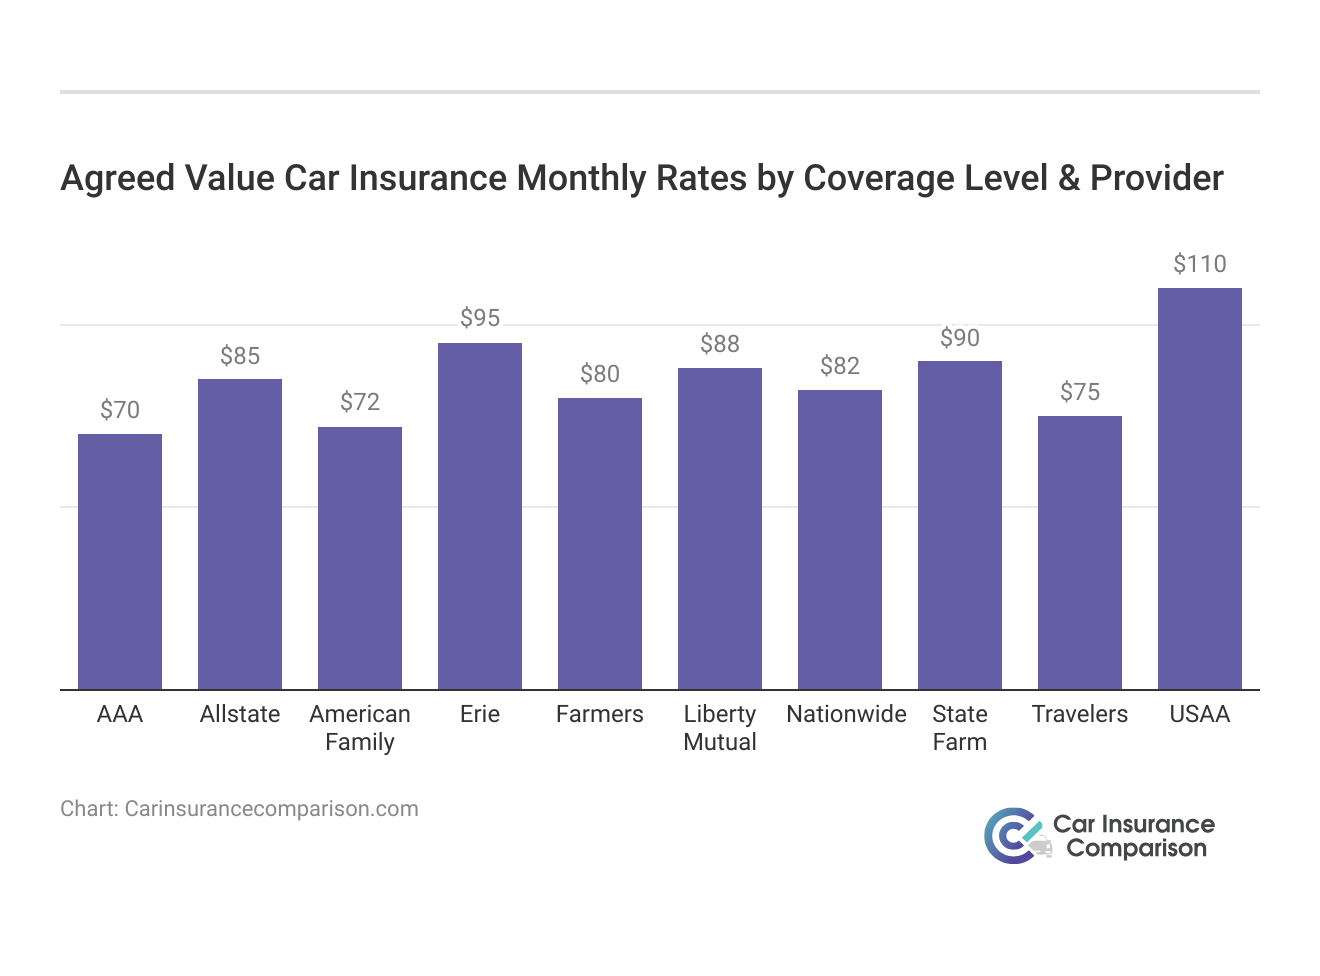 <h3>Agreed Value Car Insurance Monthly Rates by Coverage Level & Provider</h3>